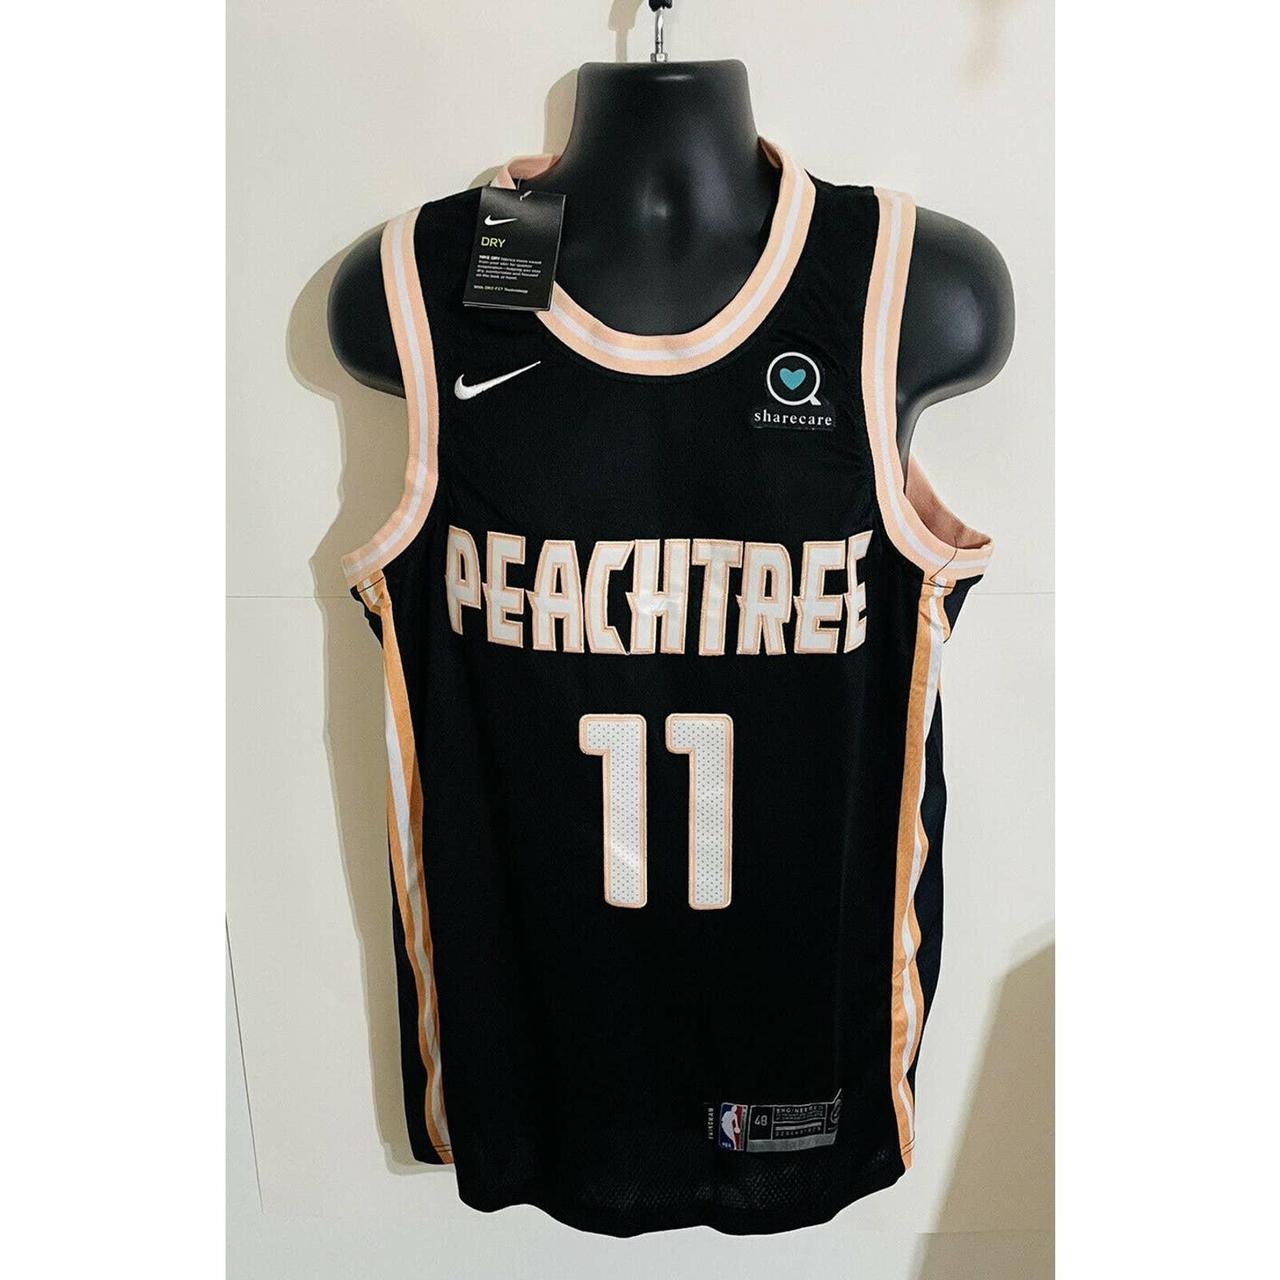 trae young jersey peachtree